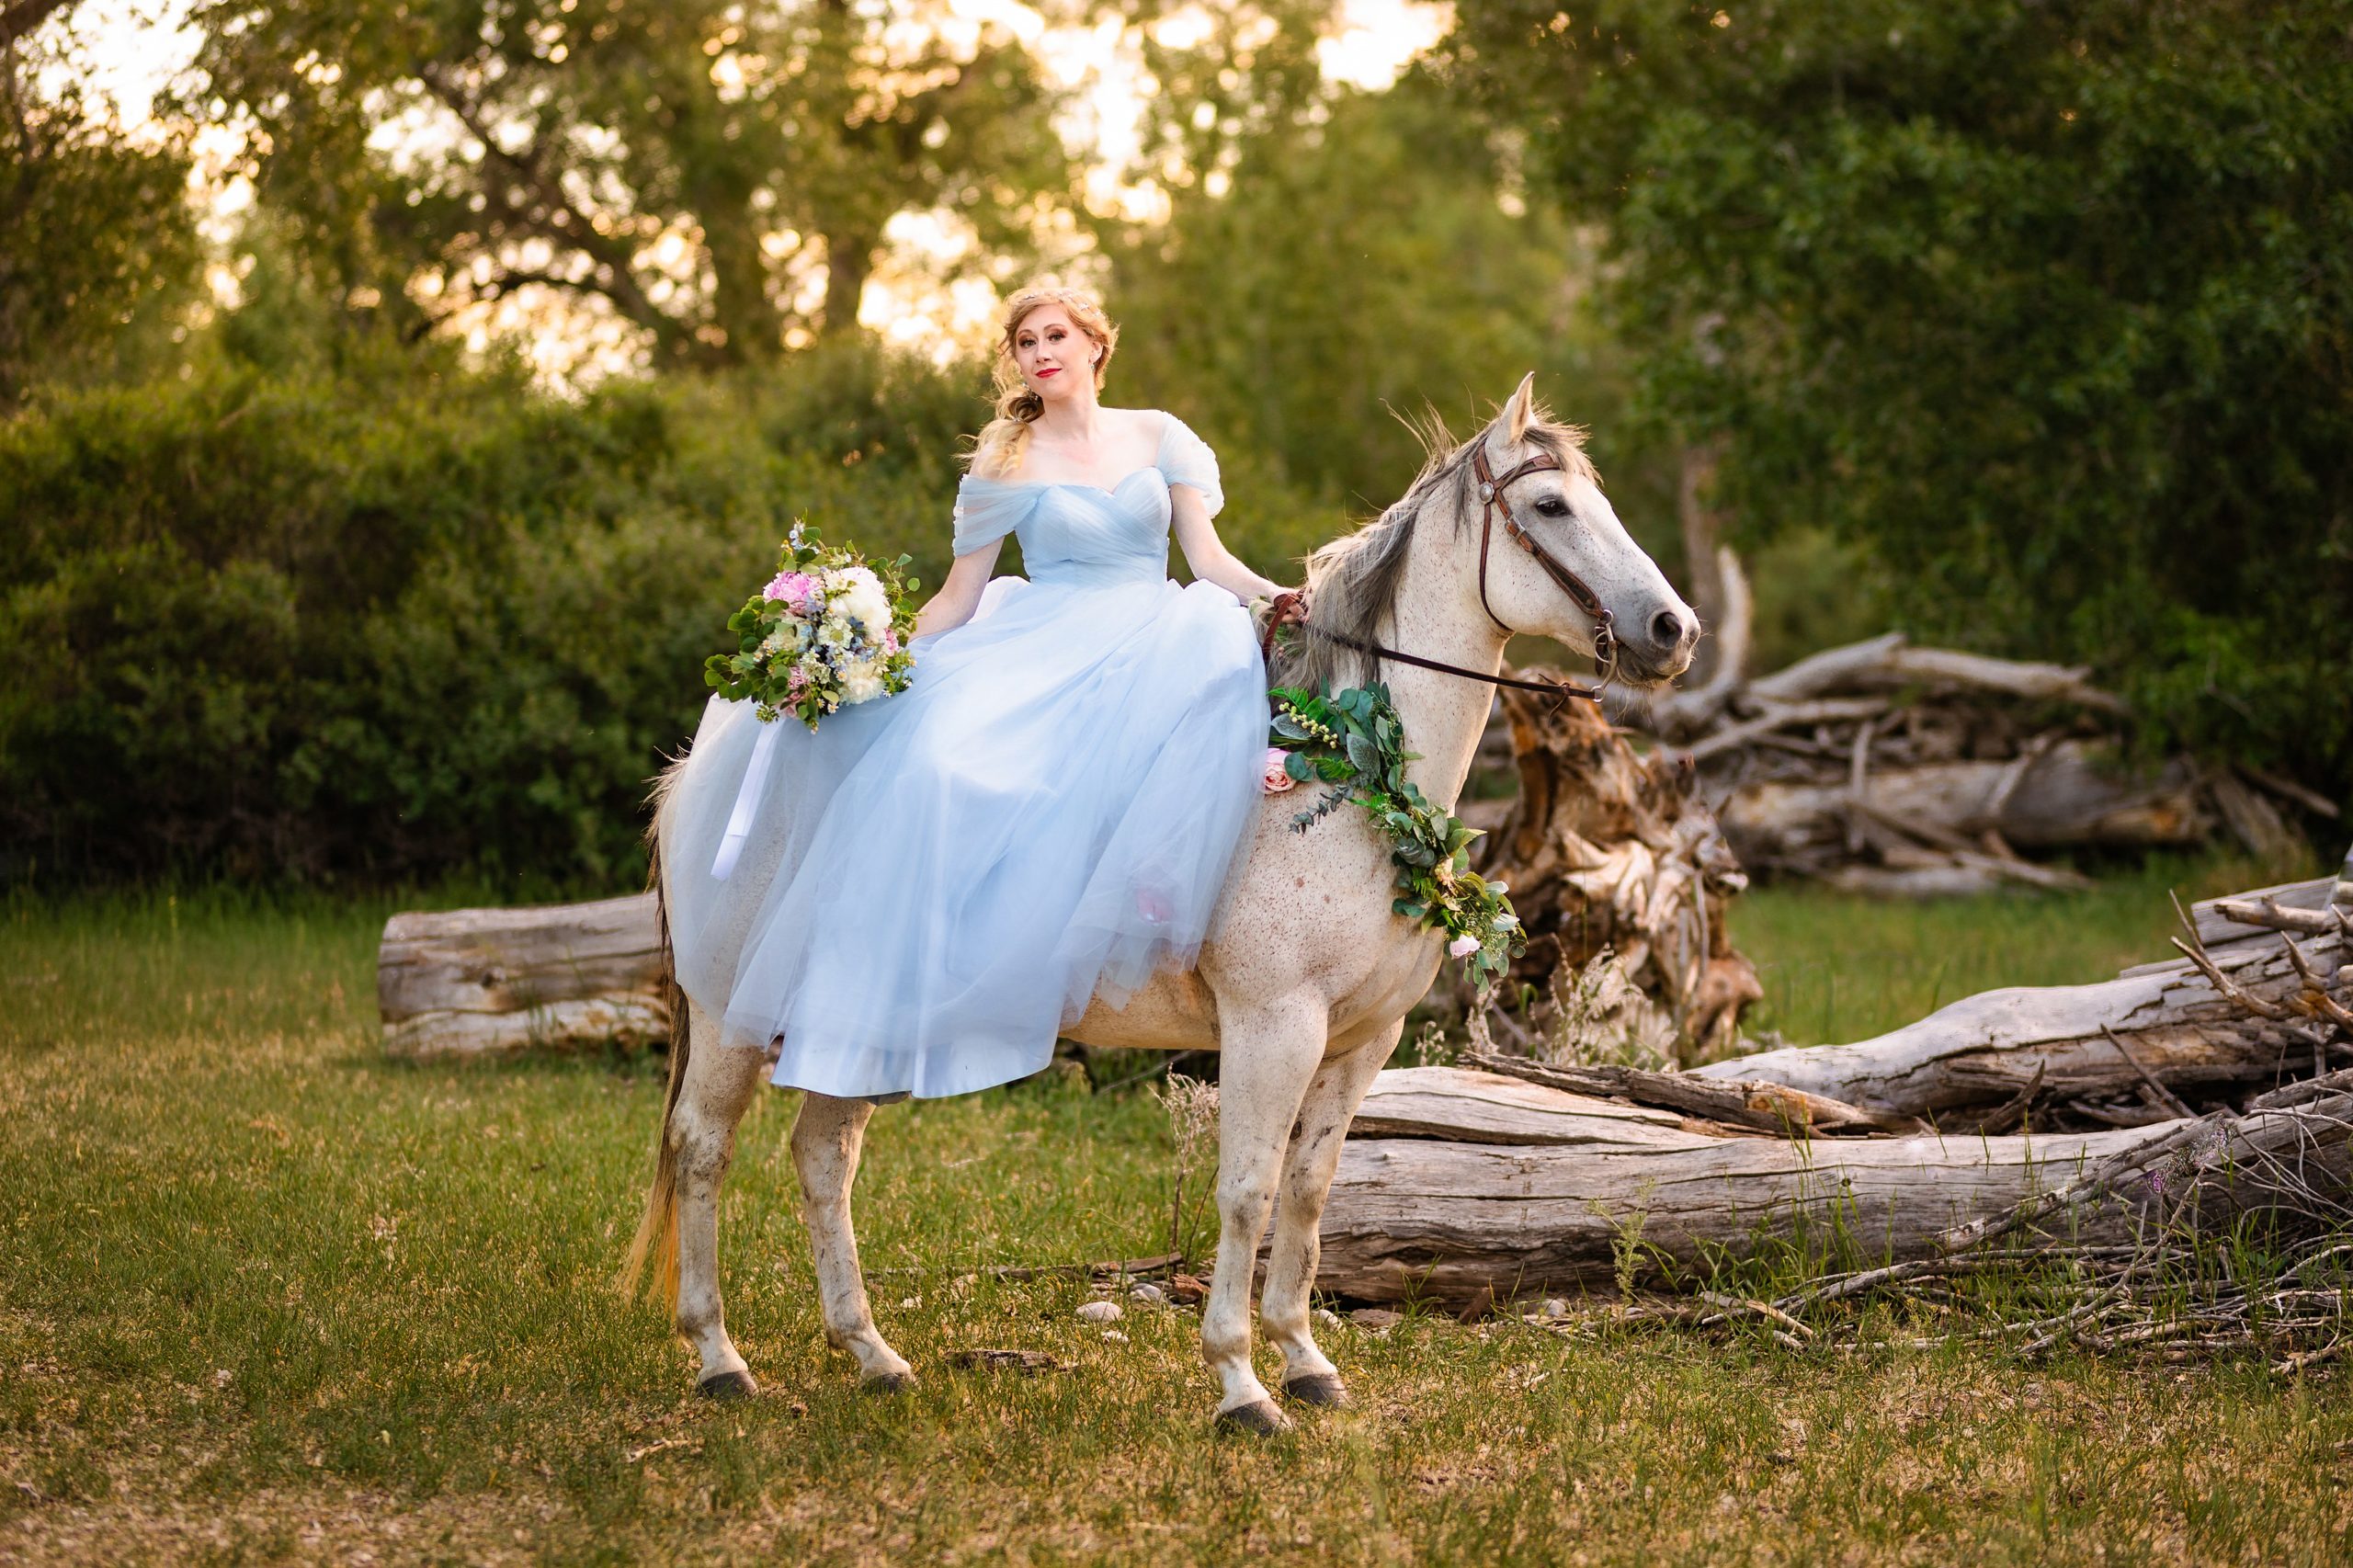 bride in blue wedding dress sitting on horse with flowers draped in one hand while looking at the camera